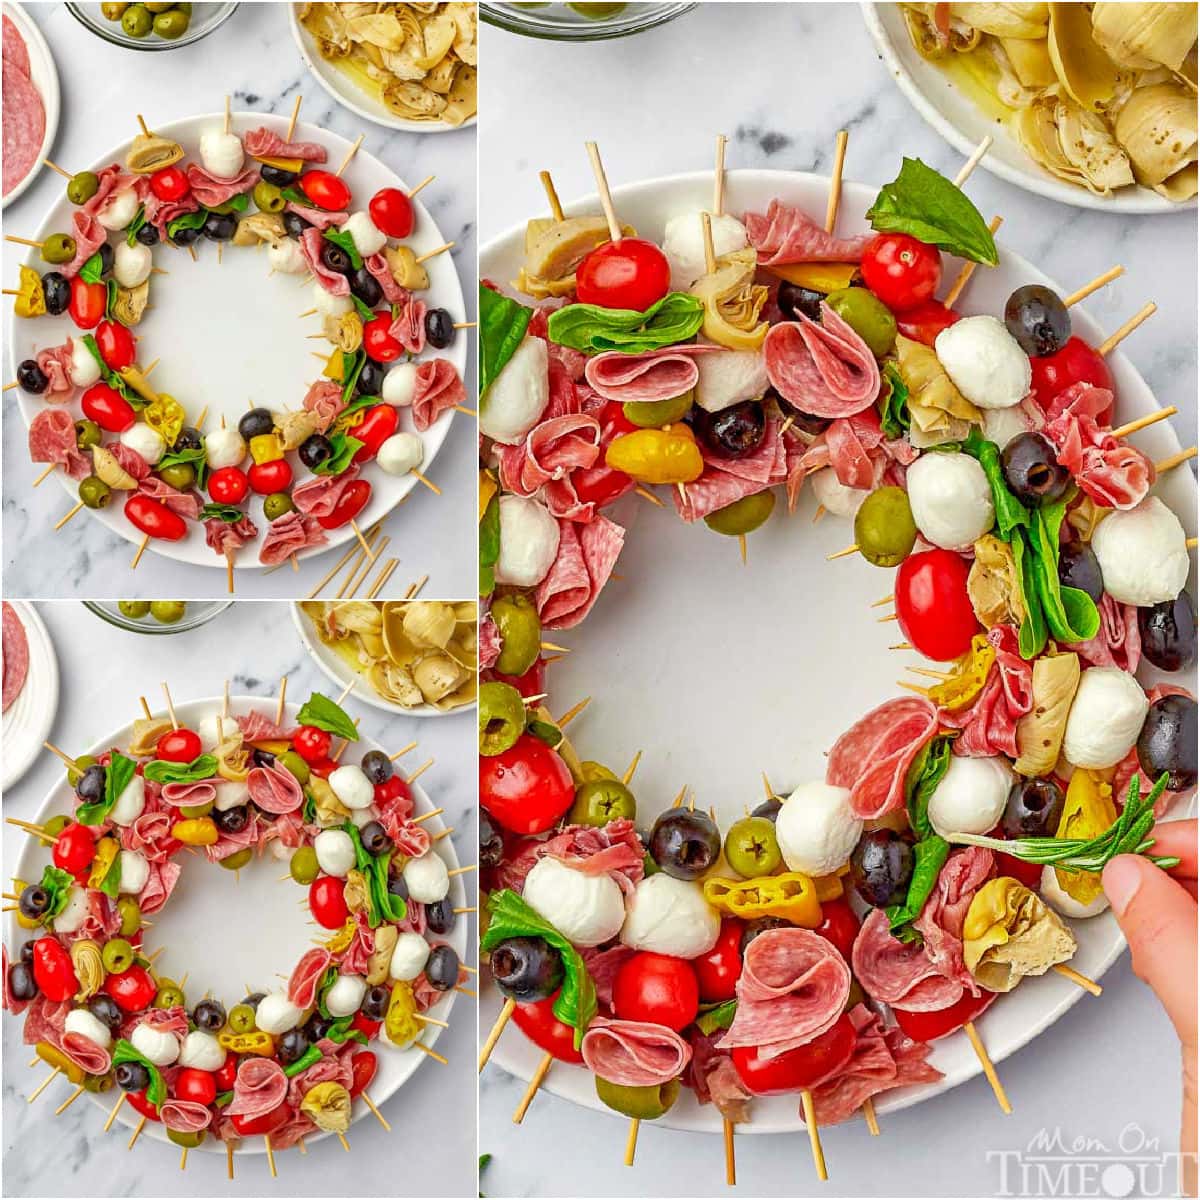 three image collage showing how to create an antipasto charcuterie wreath.